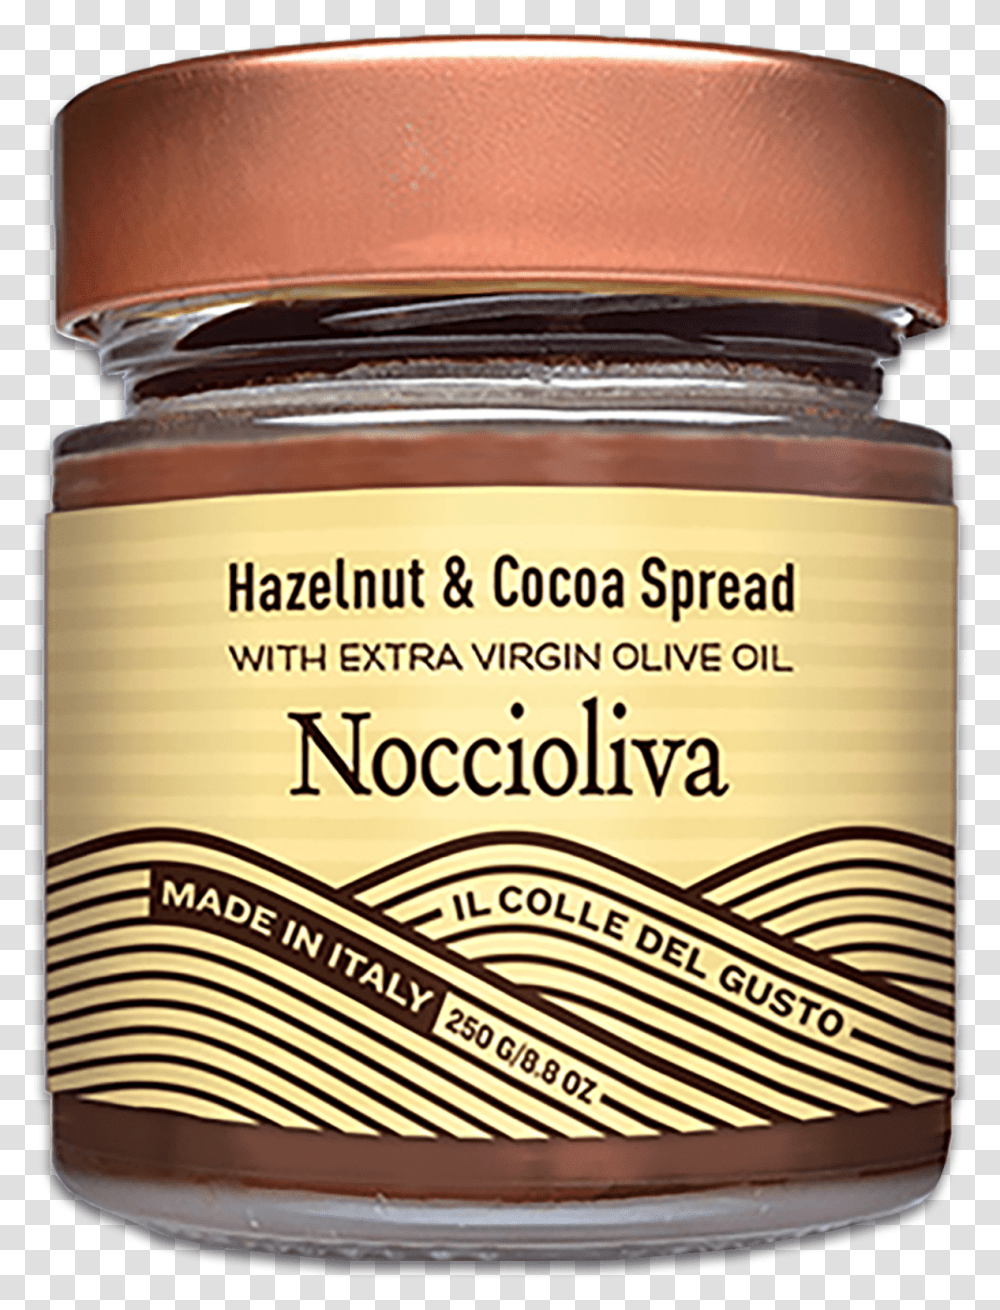 Class Lazyload Lazyload Mirage Cloudzoom Featured Image Chocolate Spread Olive Oil, Label, Food, Jar Transparent Png